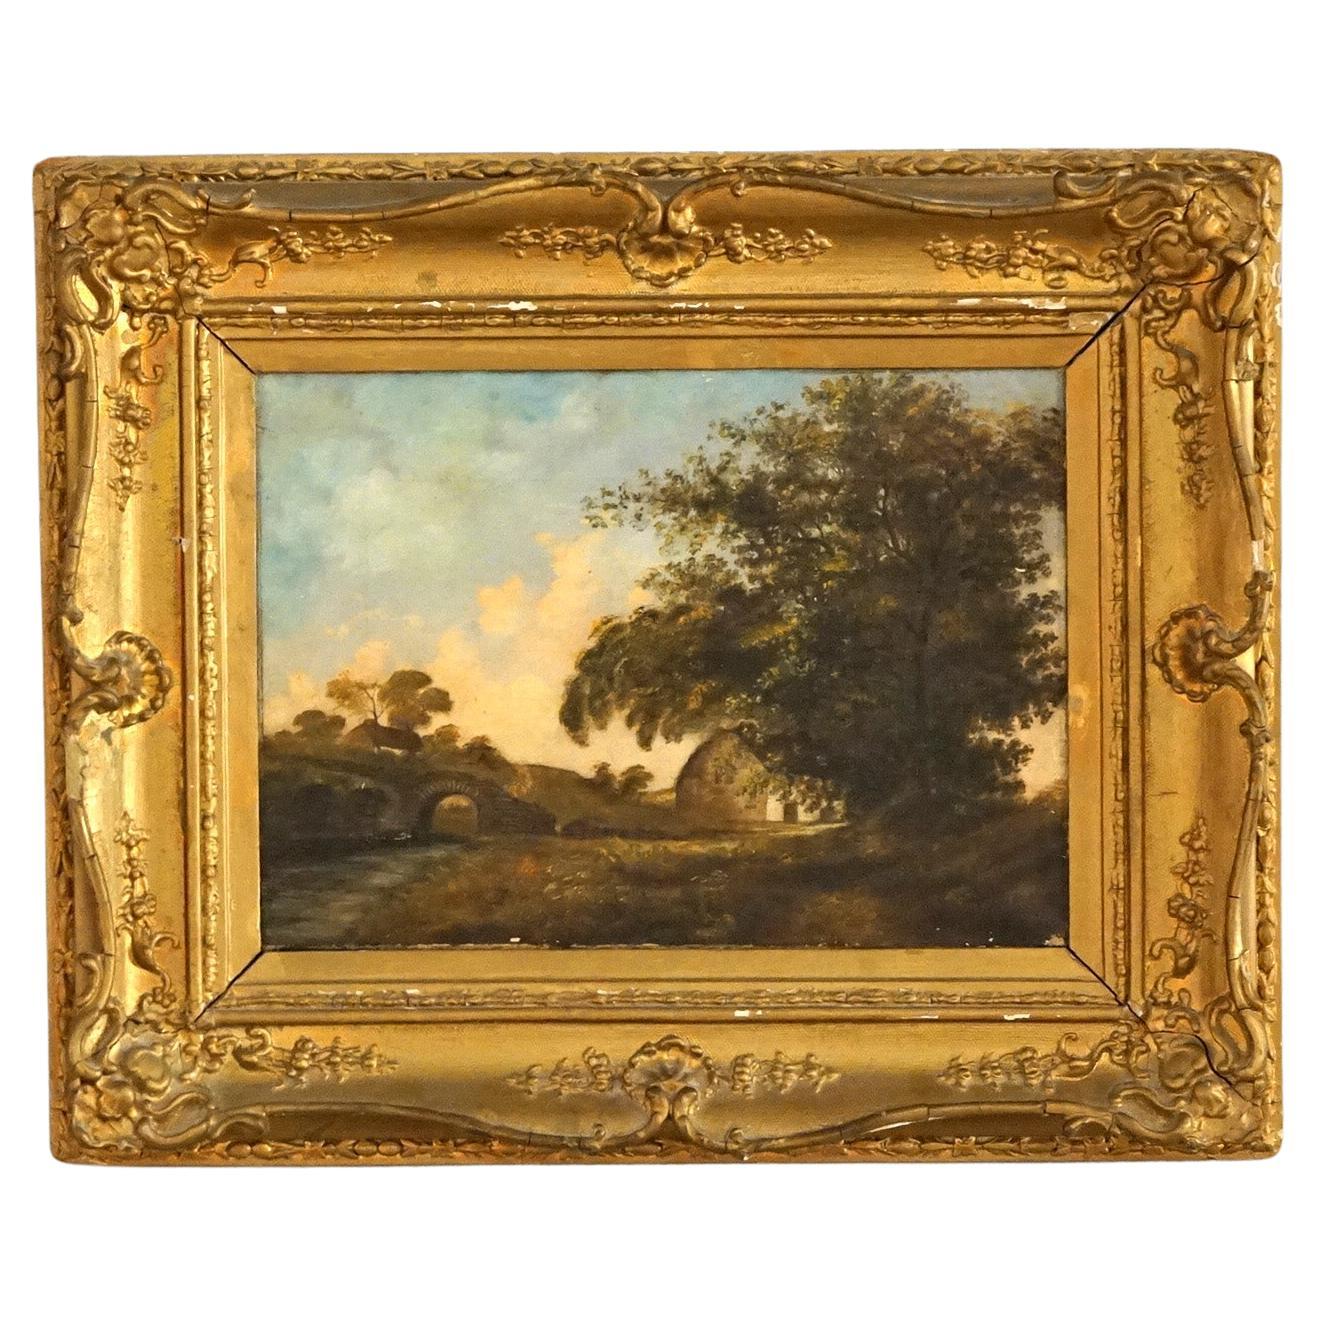 Antique Oil on Canvas Landscape Painting, Pastoral Farm Scene with Barn, C1890